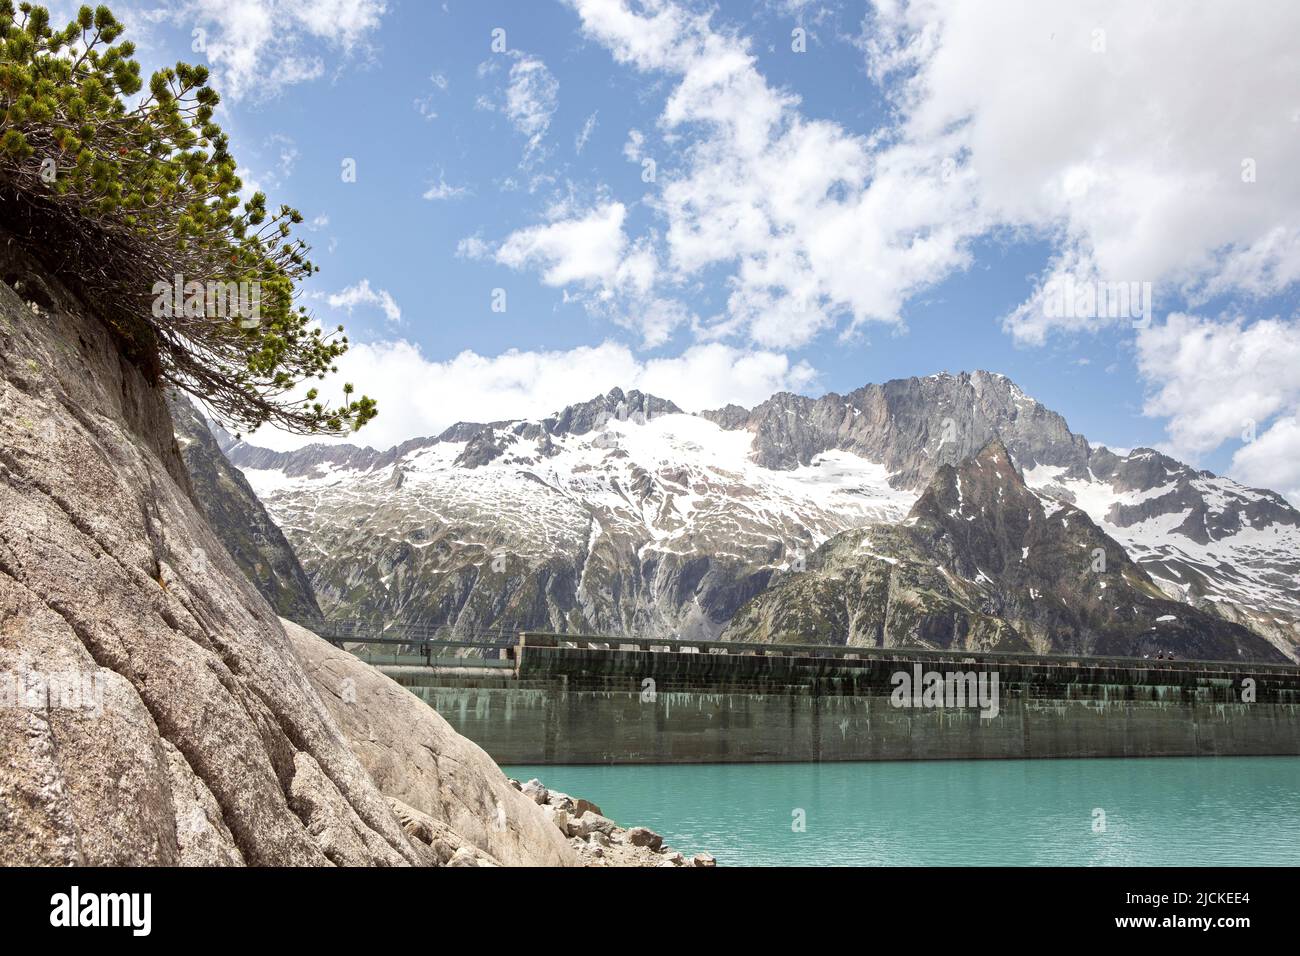 Alps mountains beautiful landscape with turquoise water lake and scenic mugs pine. High mountains nature and view on dam of Gelmer lake reservoir , su Stock Photo